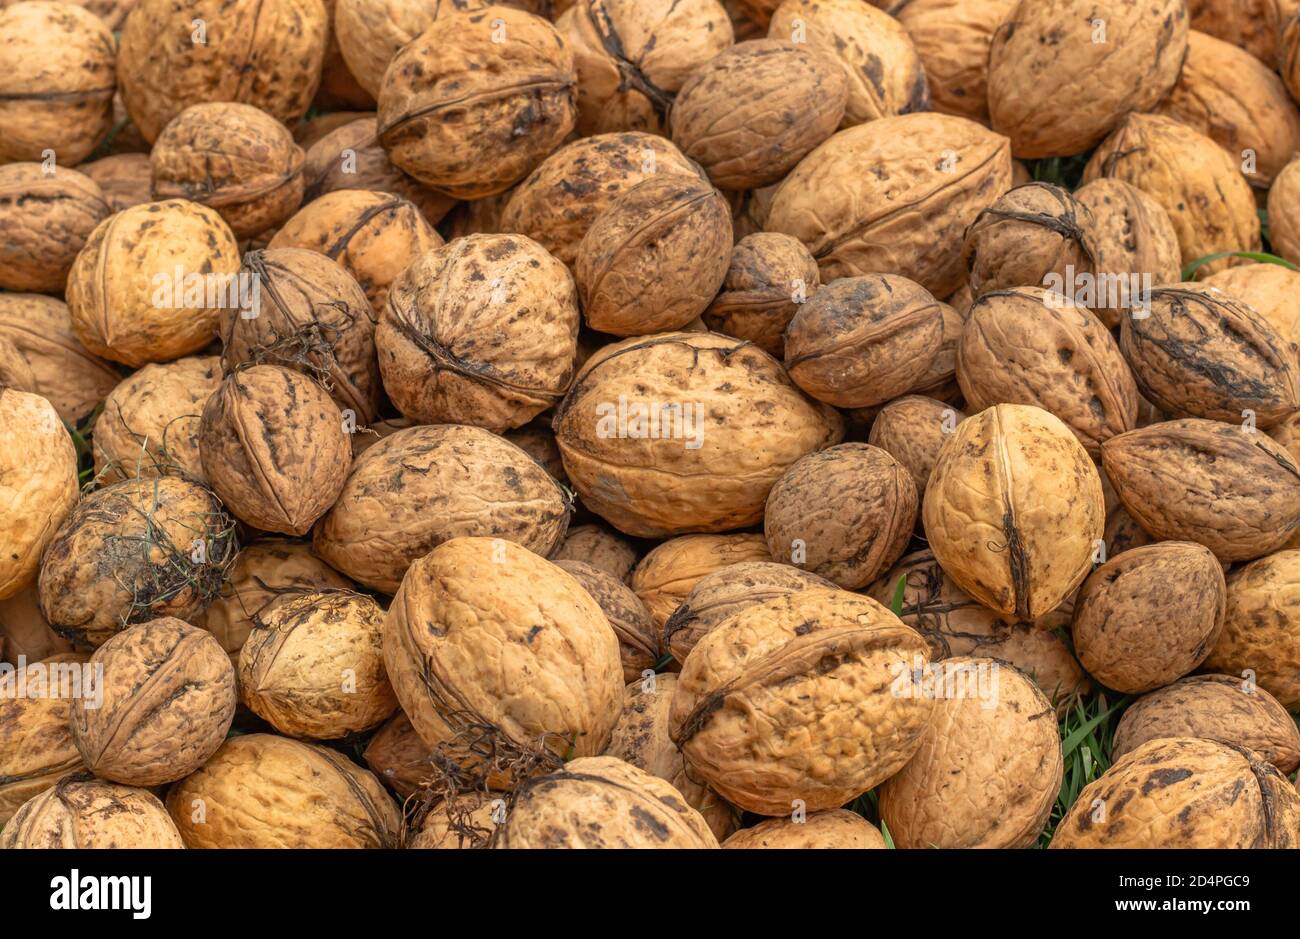 Whole walnuts top view. Fresh raw walnuts full of healthy fats, fiber, vitamins and minerals.Eating walnuts to better brain function.Food background. Stock Photo